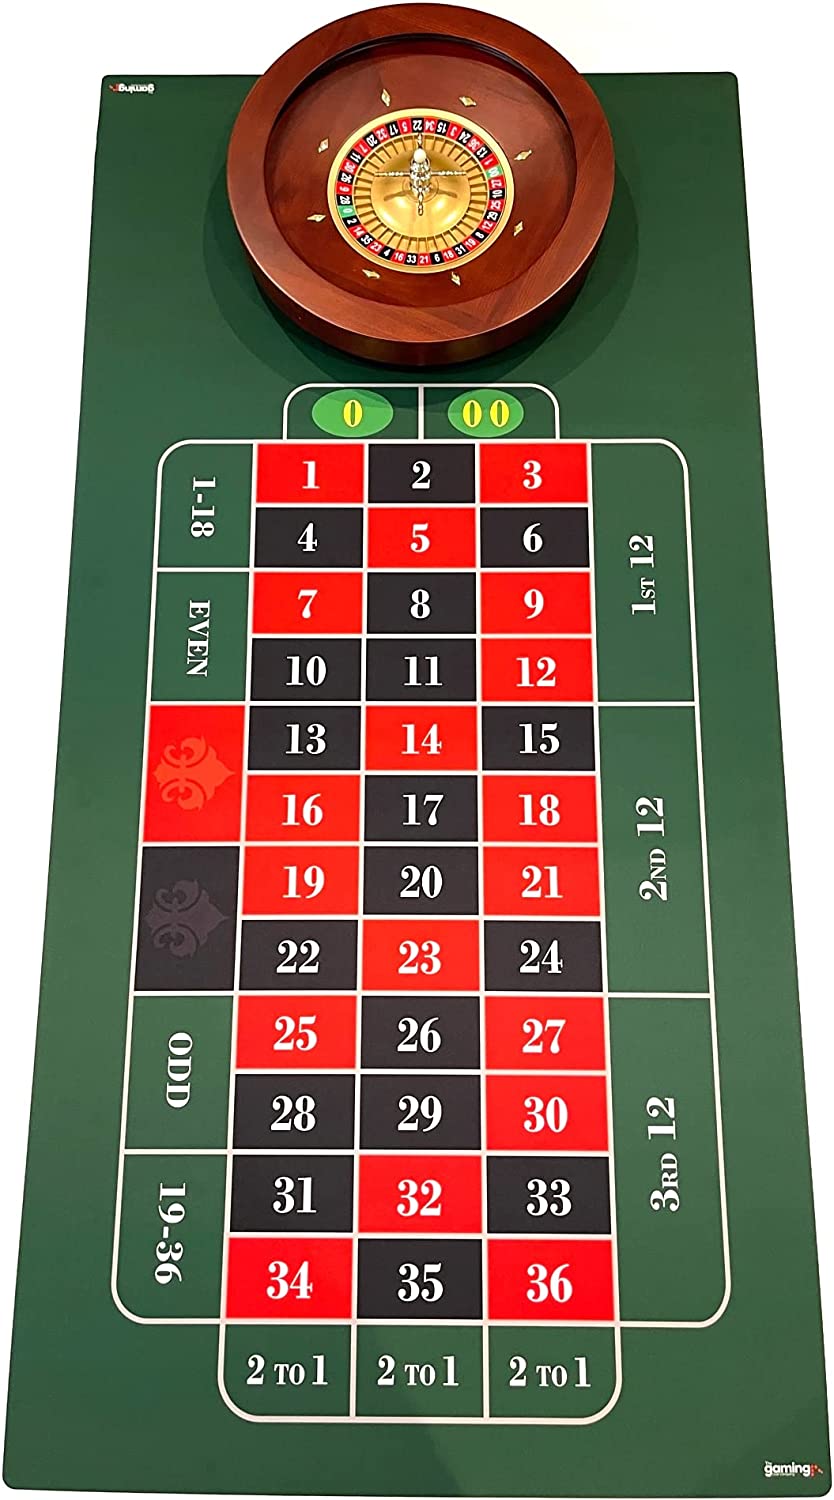 GMC Deluxe 900mm x 1800mm x 3mm Roulette Table Top Casino Mat Board Cloth